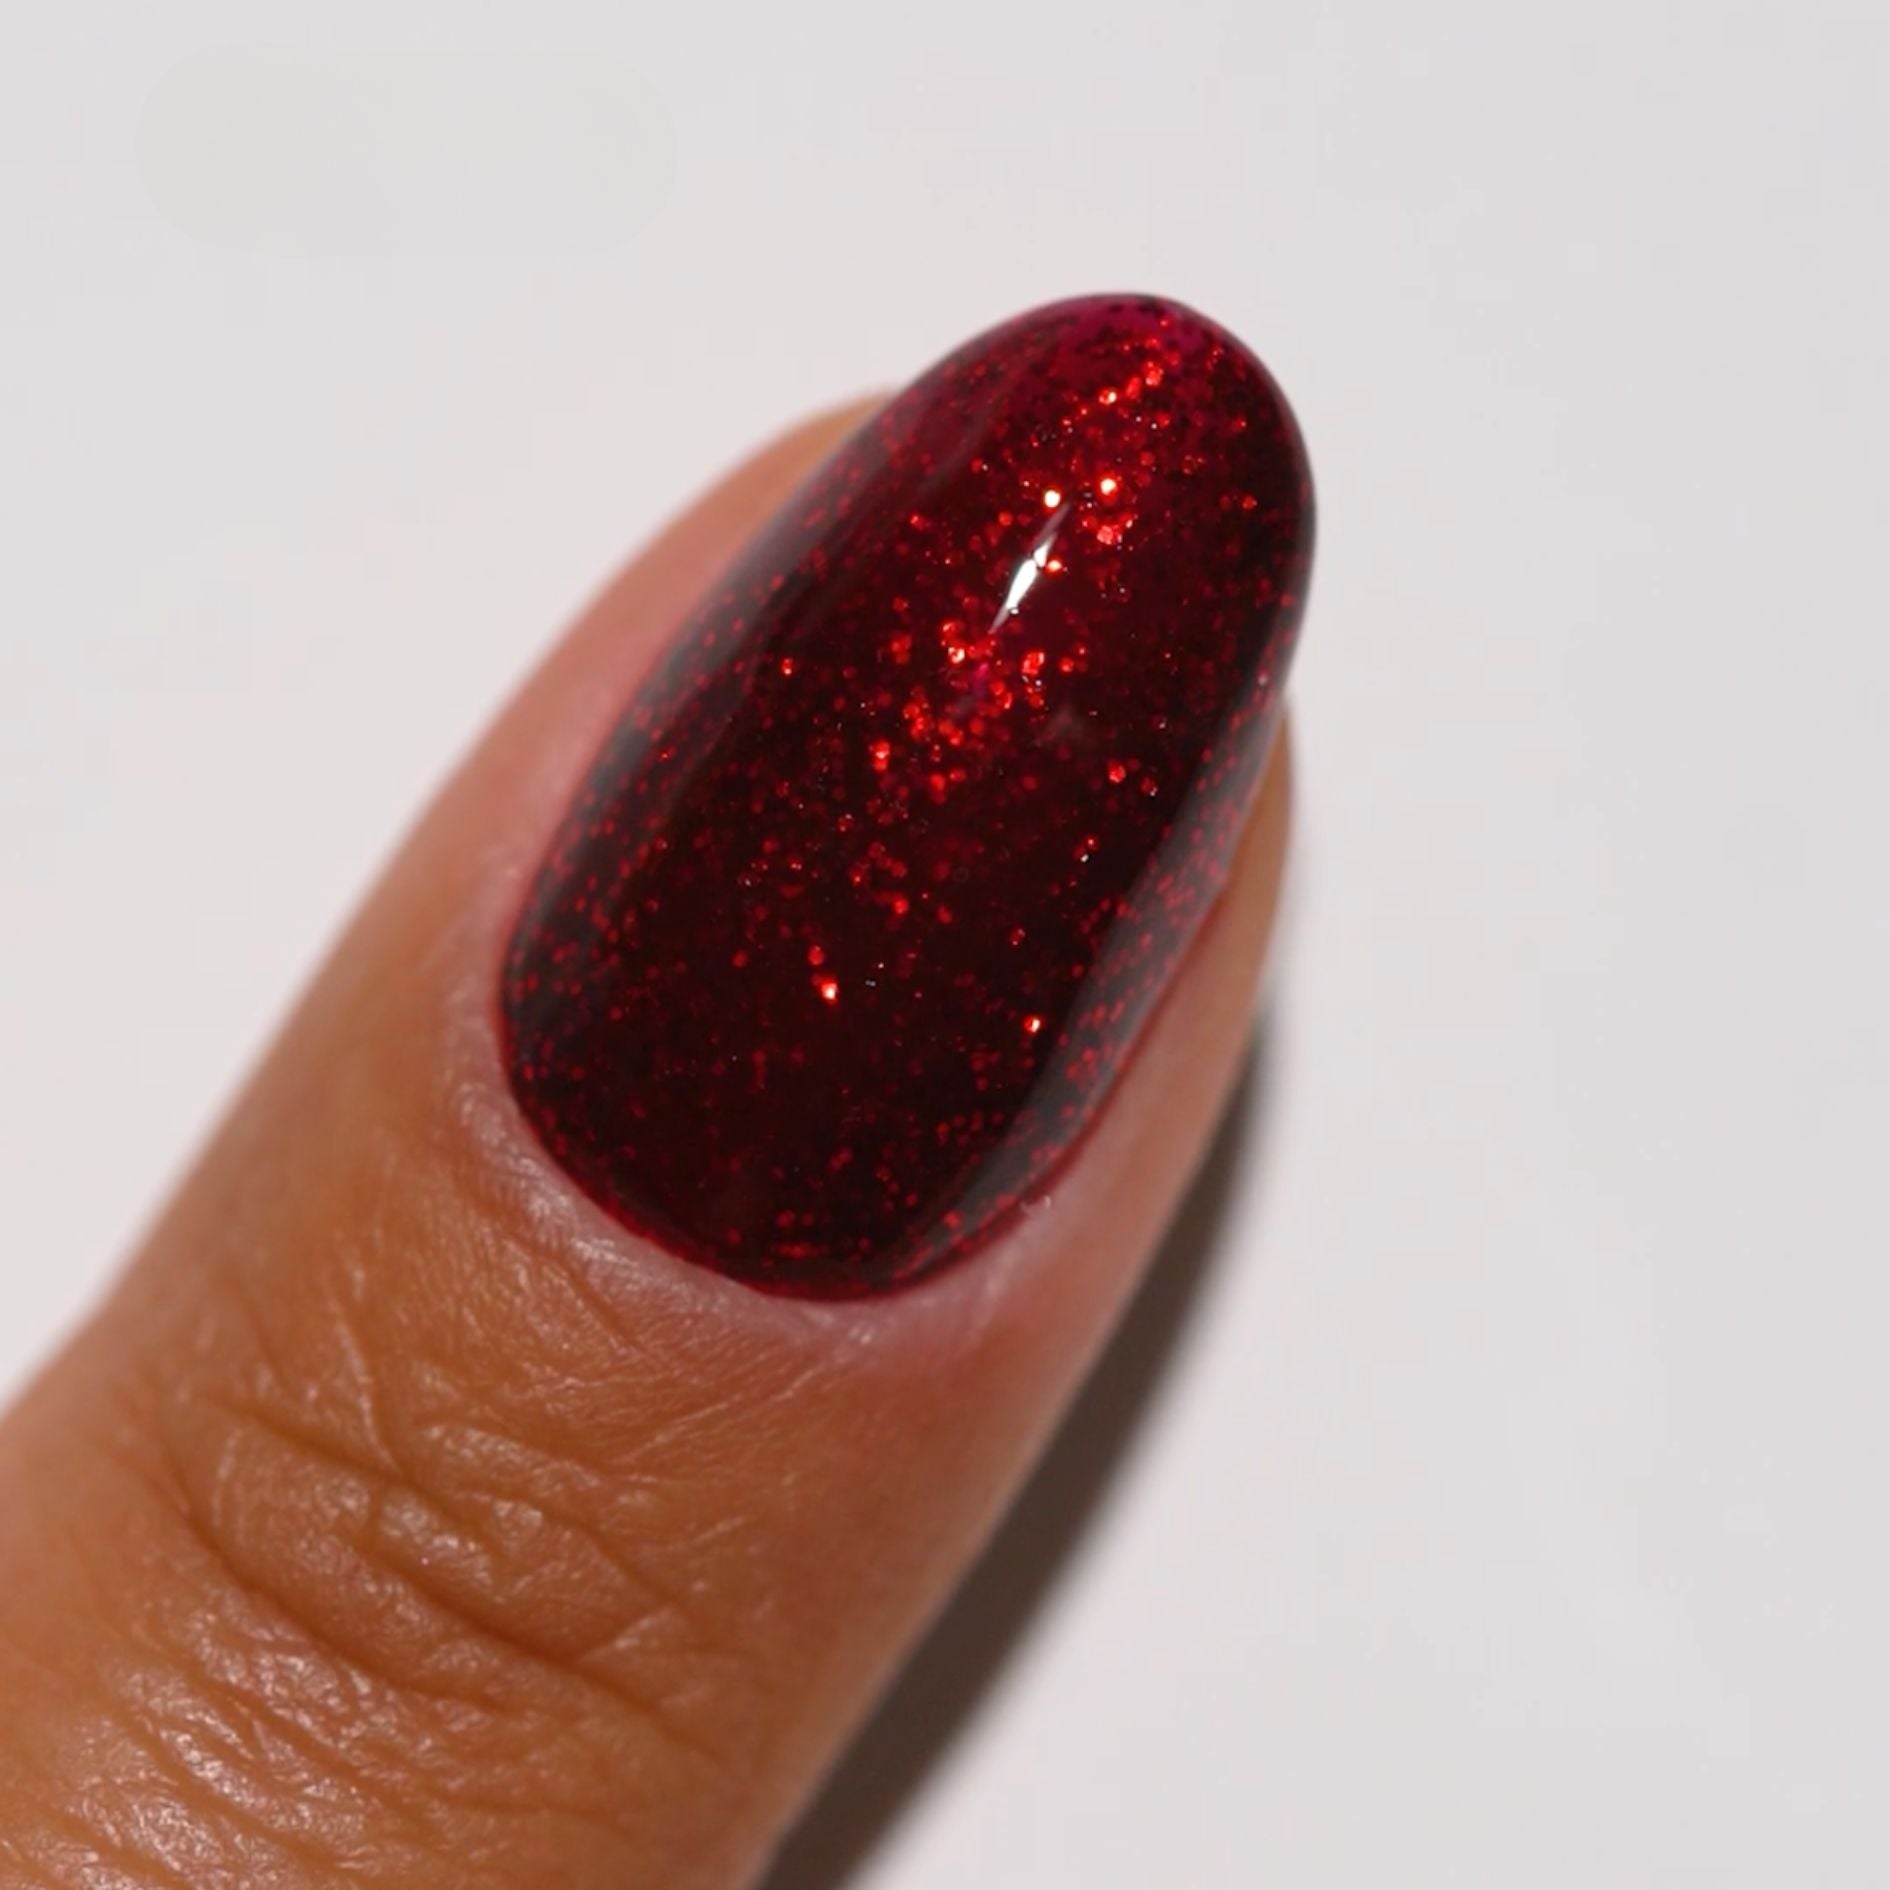 DND DV 036 Sultry Gem - DND Diva Gel Polish & Matching Nail Lacquer Duo Set